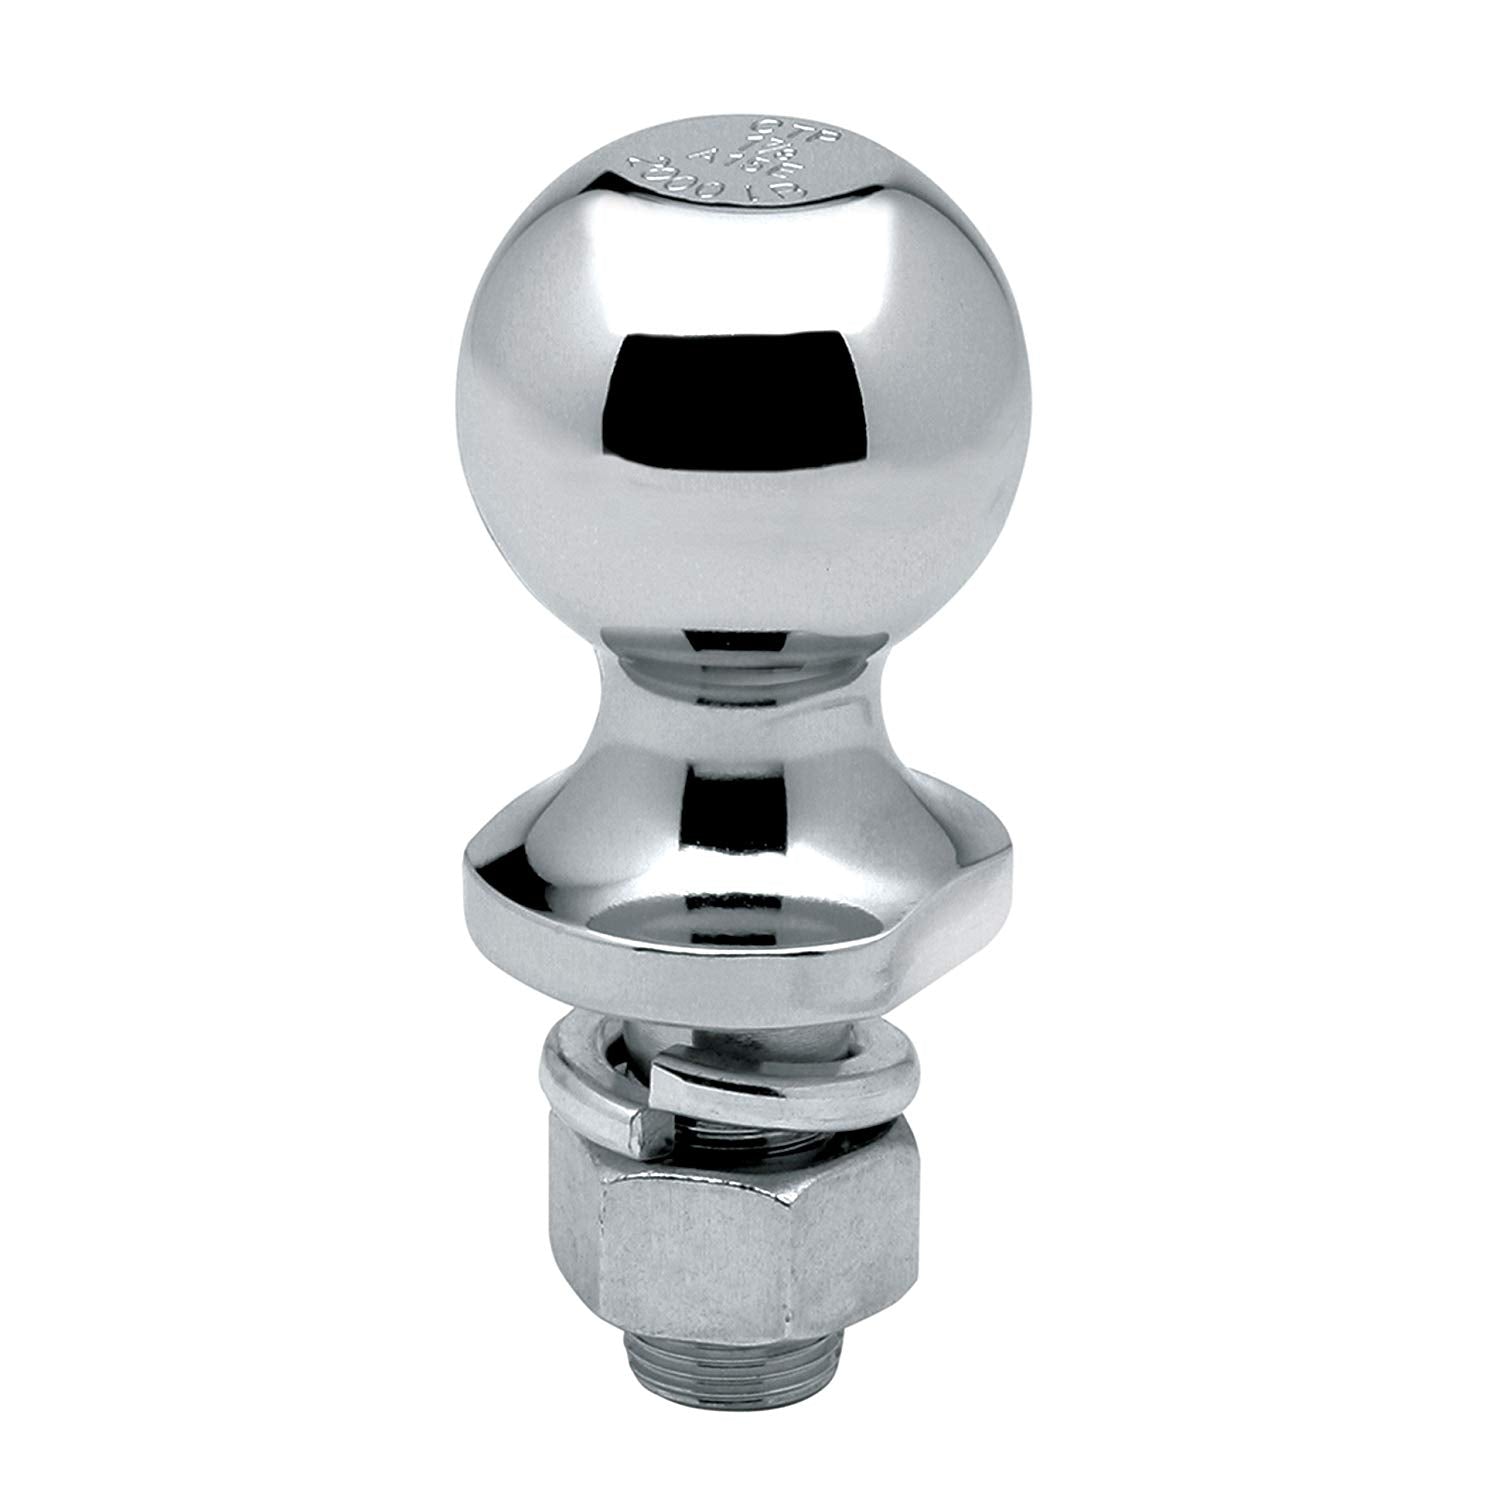 Woodland Airstream Parts and RV Accessories Store, Tow Ready Reese Class I Hitch Ball, Chrome - 1-7/8" Ball x 1" x 2-1/8", 2,000 lbs.